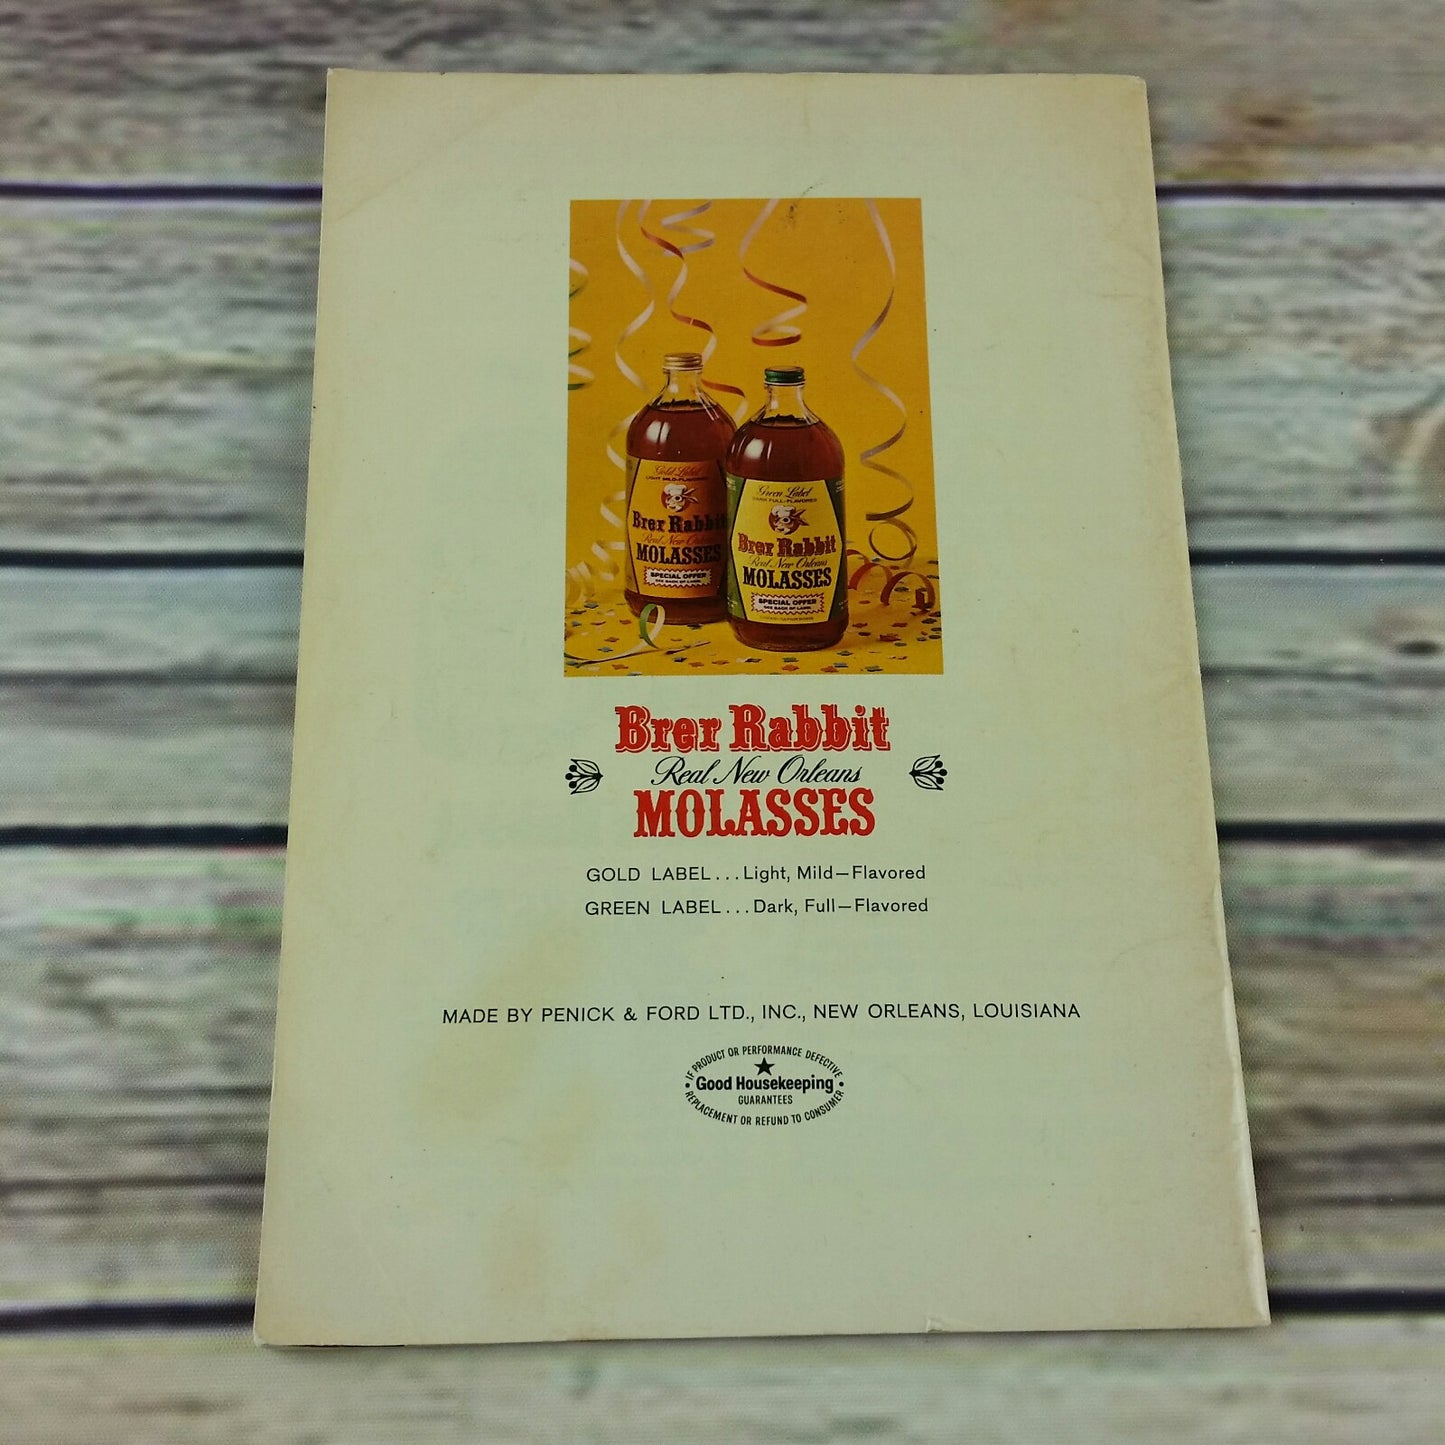 Vintage Party Cookbook Brer Rabbit Molasses Promo Recipes 1964 Ads Booklet Advertising - At Grandma's Table